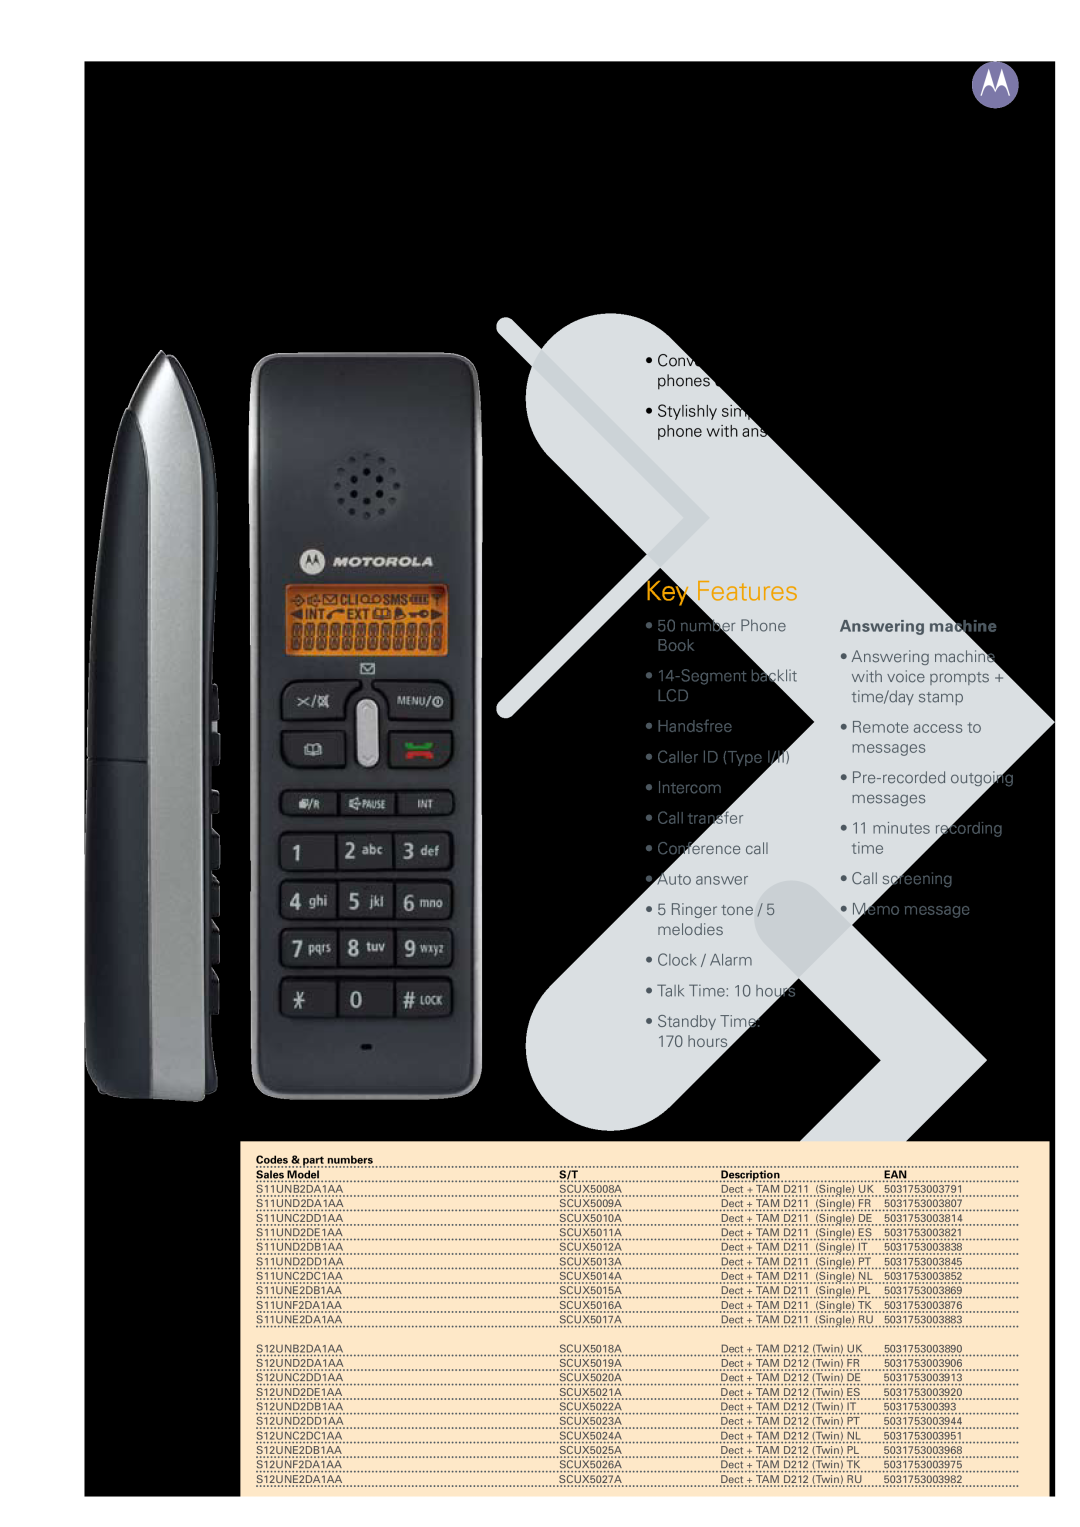 Motorola D210 specifications Answering machine, Specification Sheet, Codes & part numbers, Sales Model, Description 